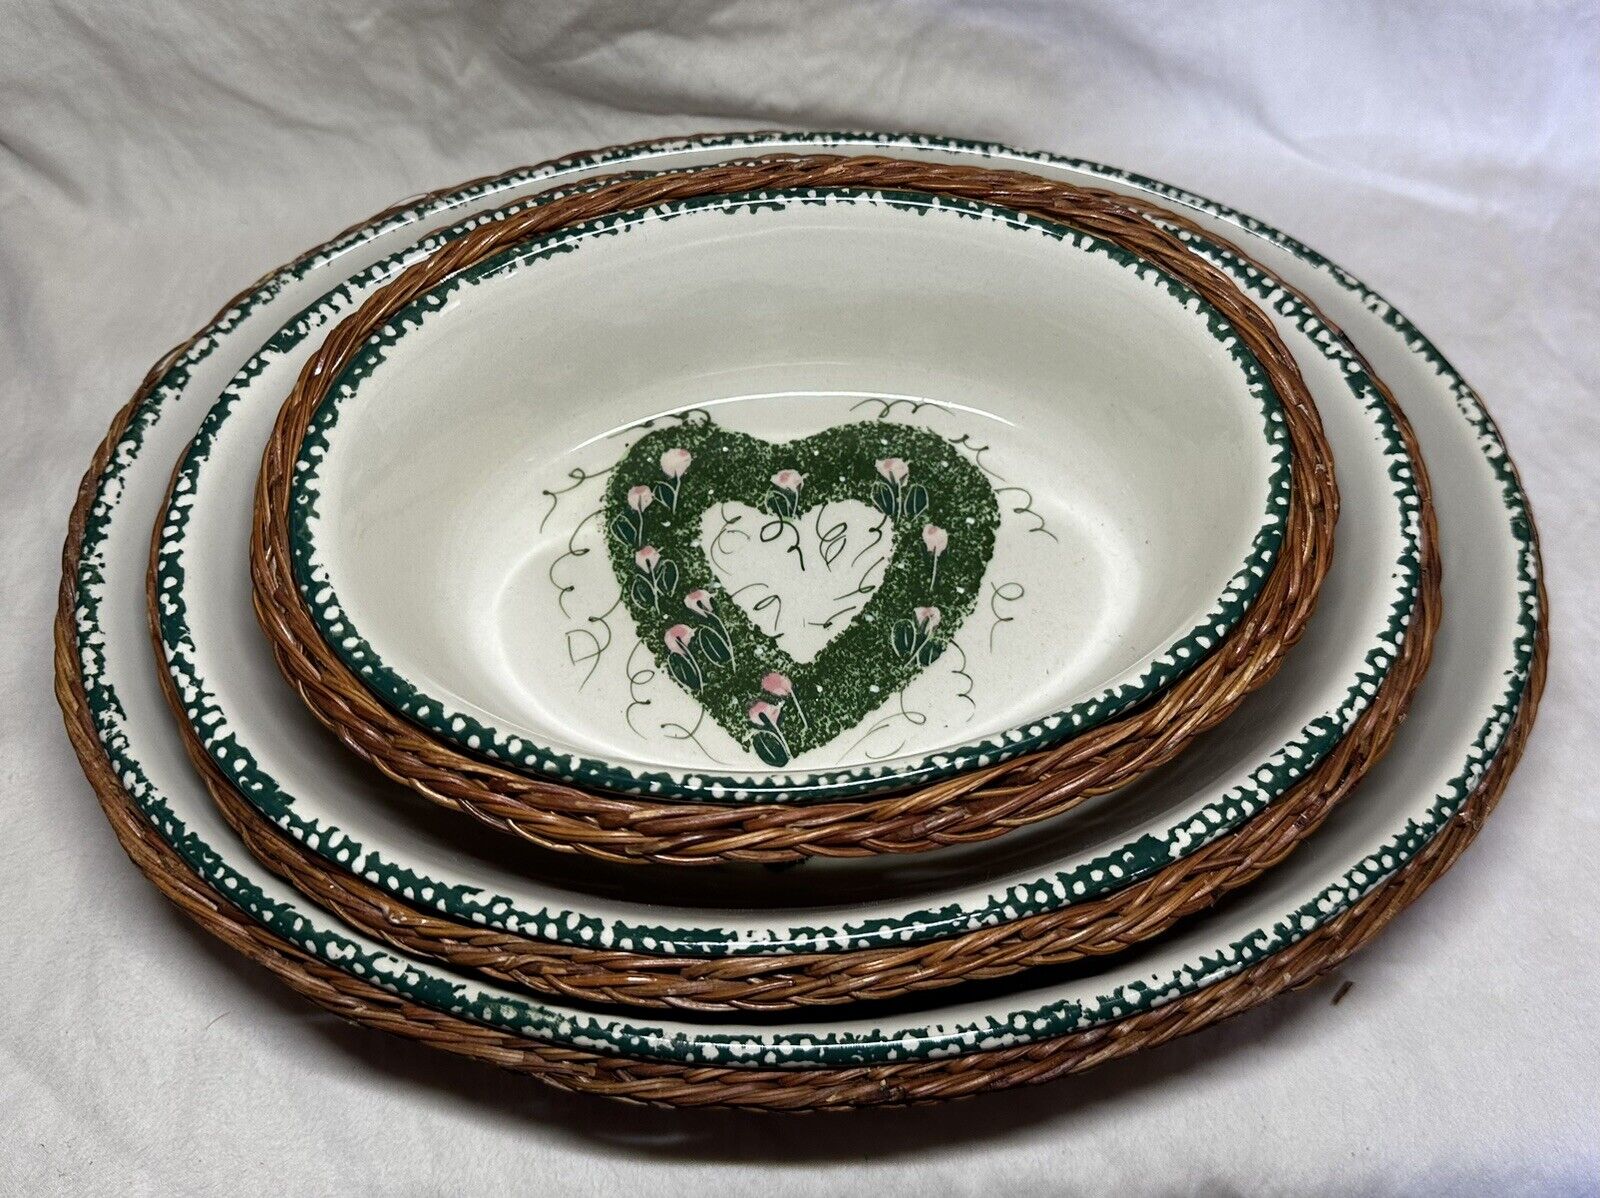 3 Nesting Oval Stoneware Casserole Dishes With Baskets With Hearts Shaped Wreath